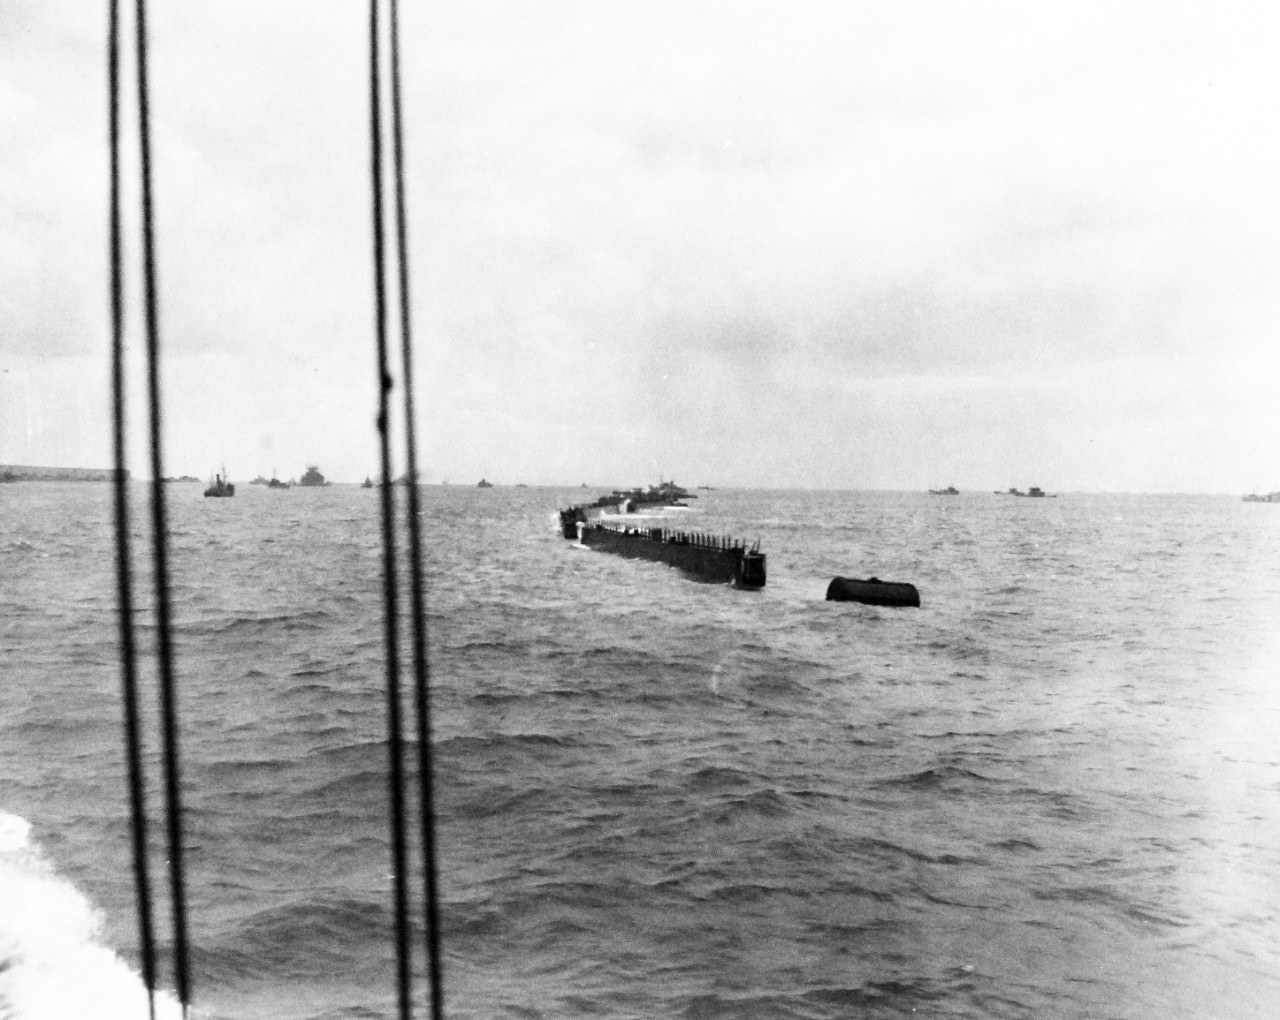 80-G-285195:  Normandy Invasion, Mulberries, June 1944.   “Bombardons” wave-repellent units forming part of the “Mulberry,” the man-made harbor off Normandy coast of France.  Photograph released November 7, 1944.  Official U.S. Navy photograph, now in the collections of the National Archives.  (2016/03/15).